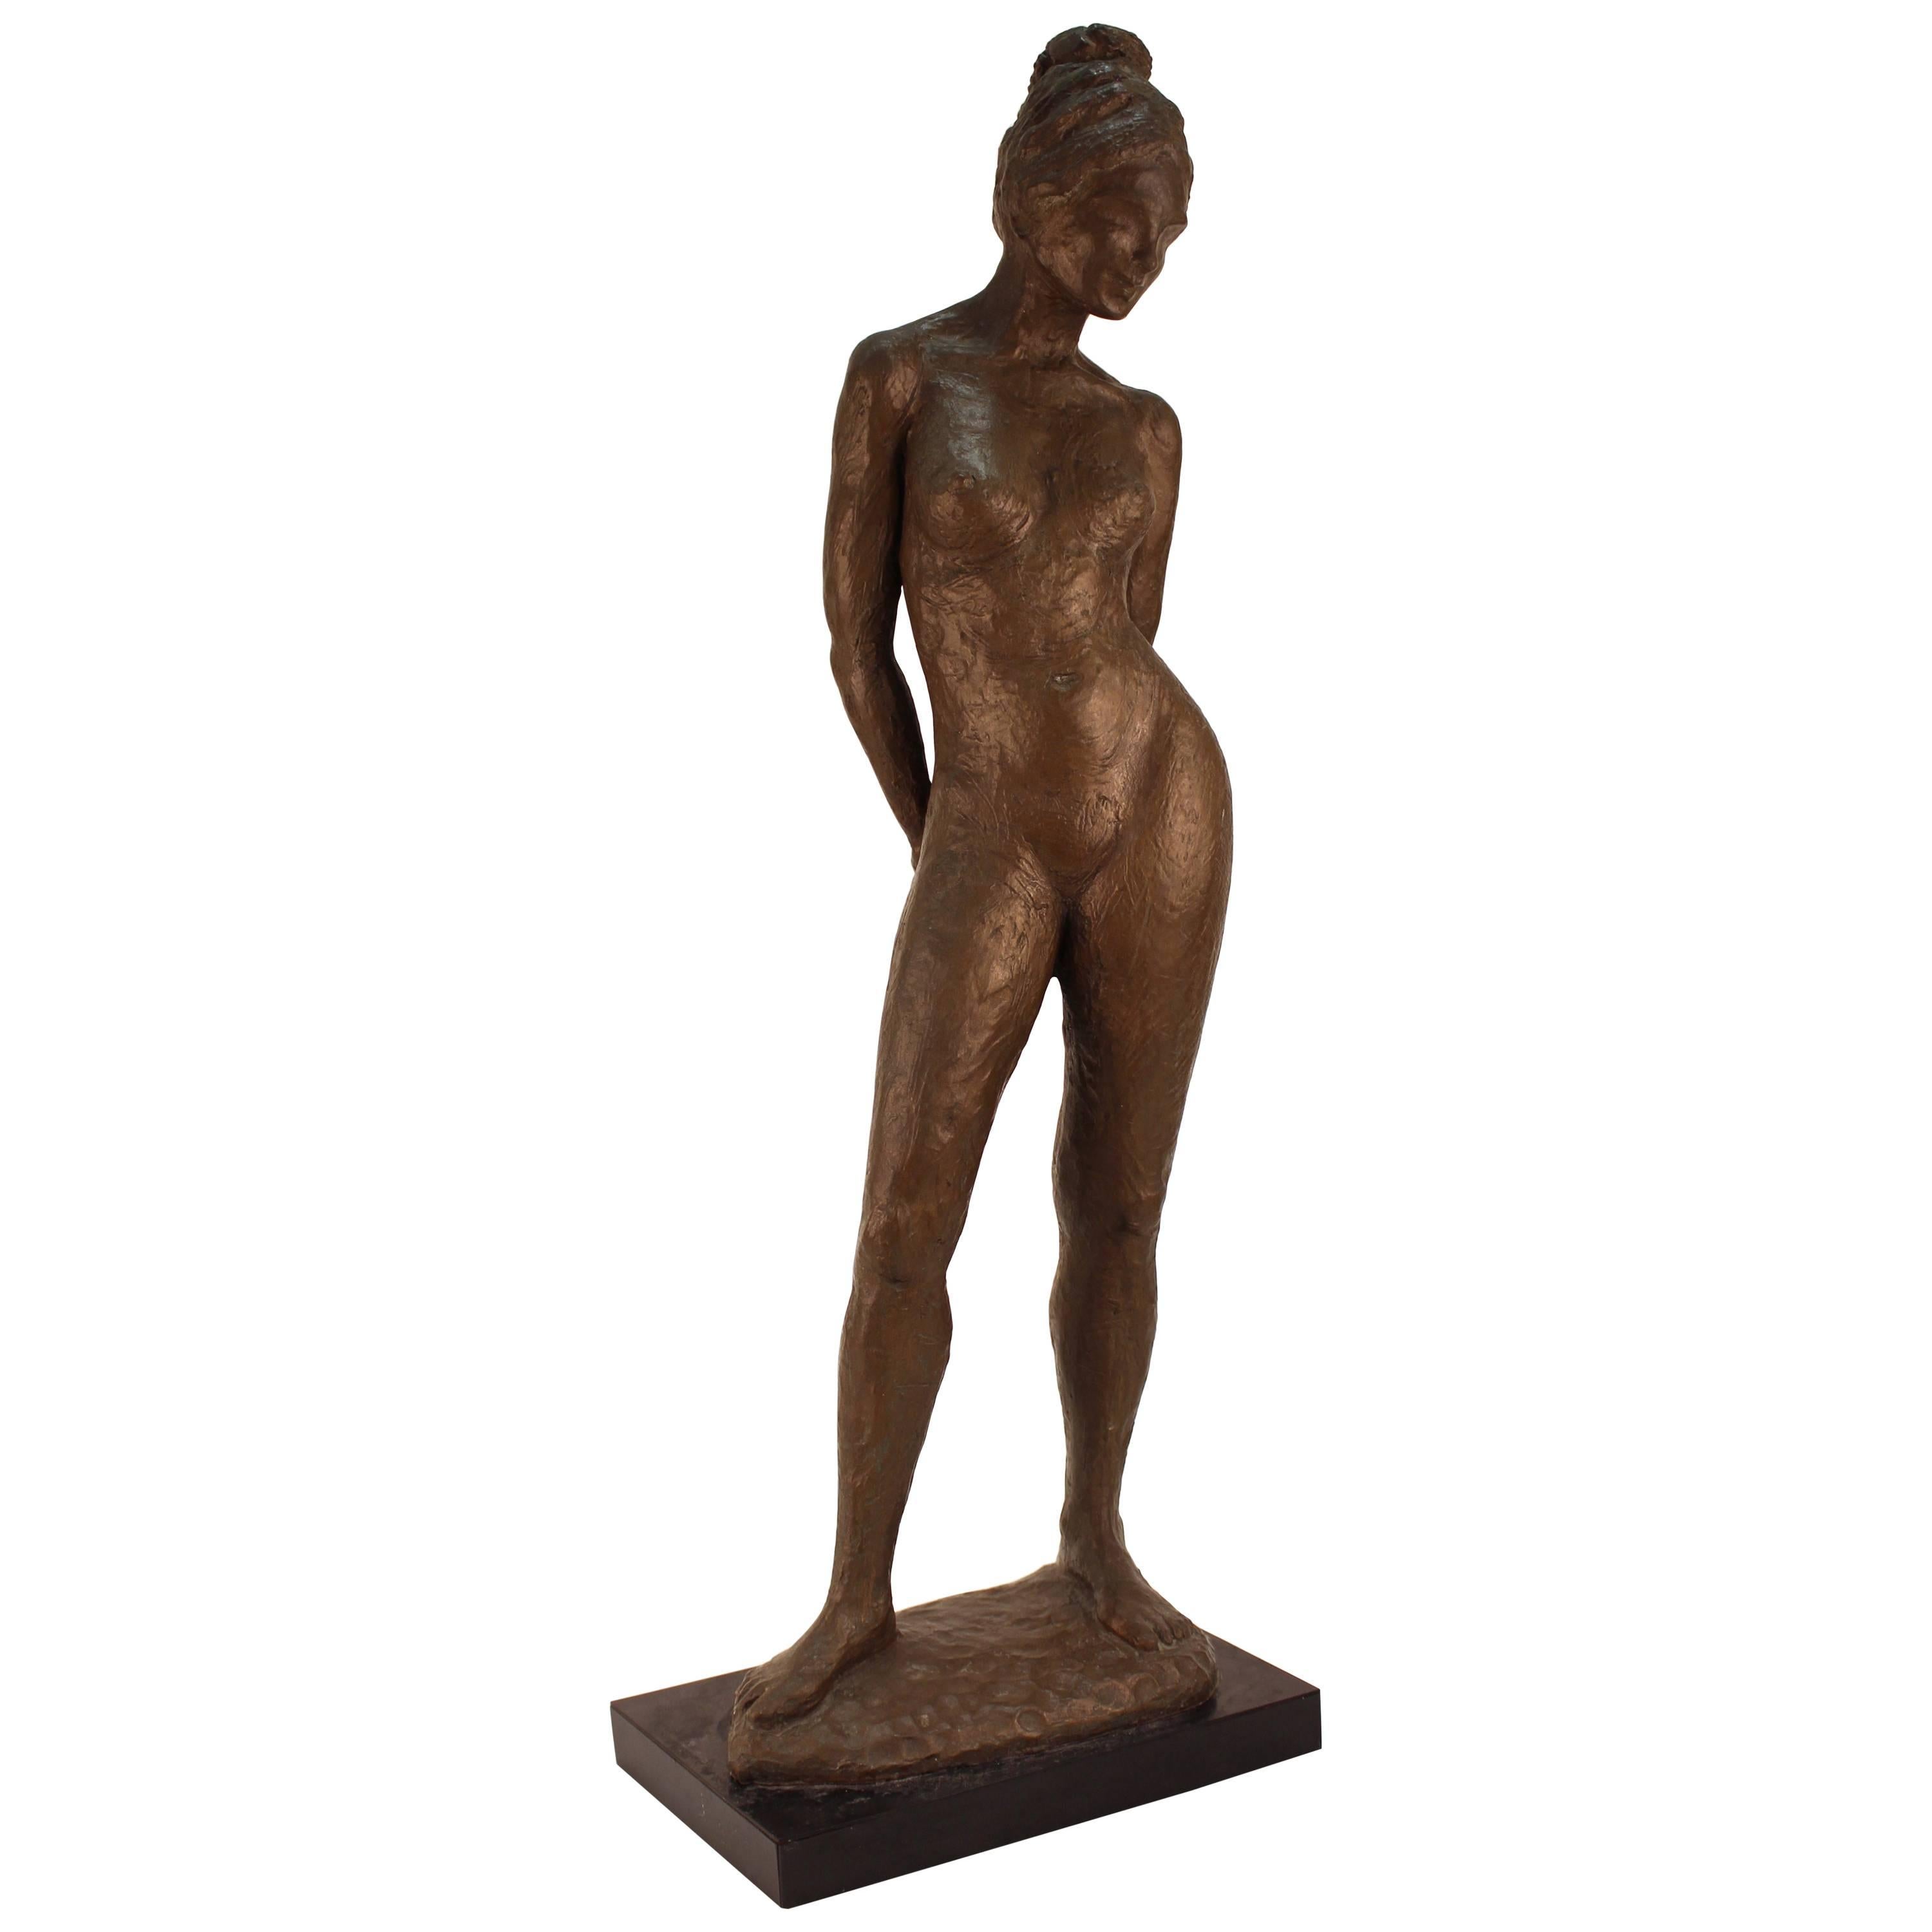 Midcentury Signed Ceramic Sculpture of a Nude Woman